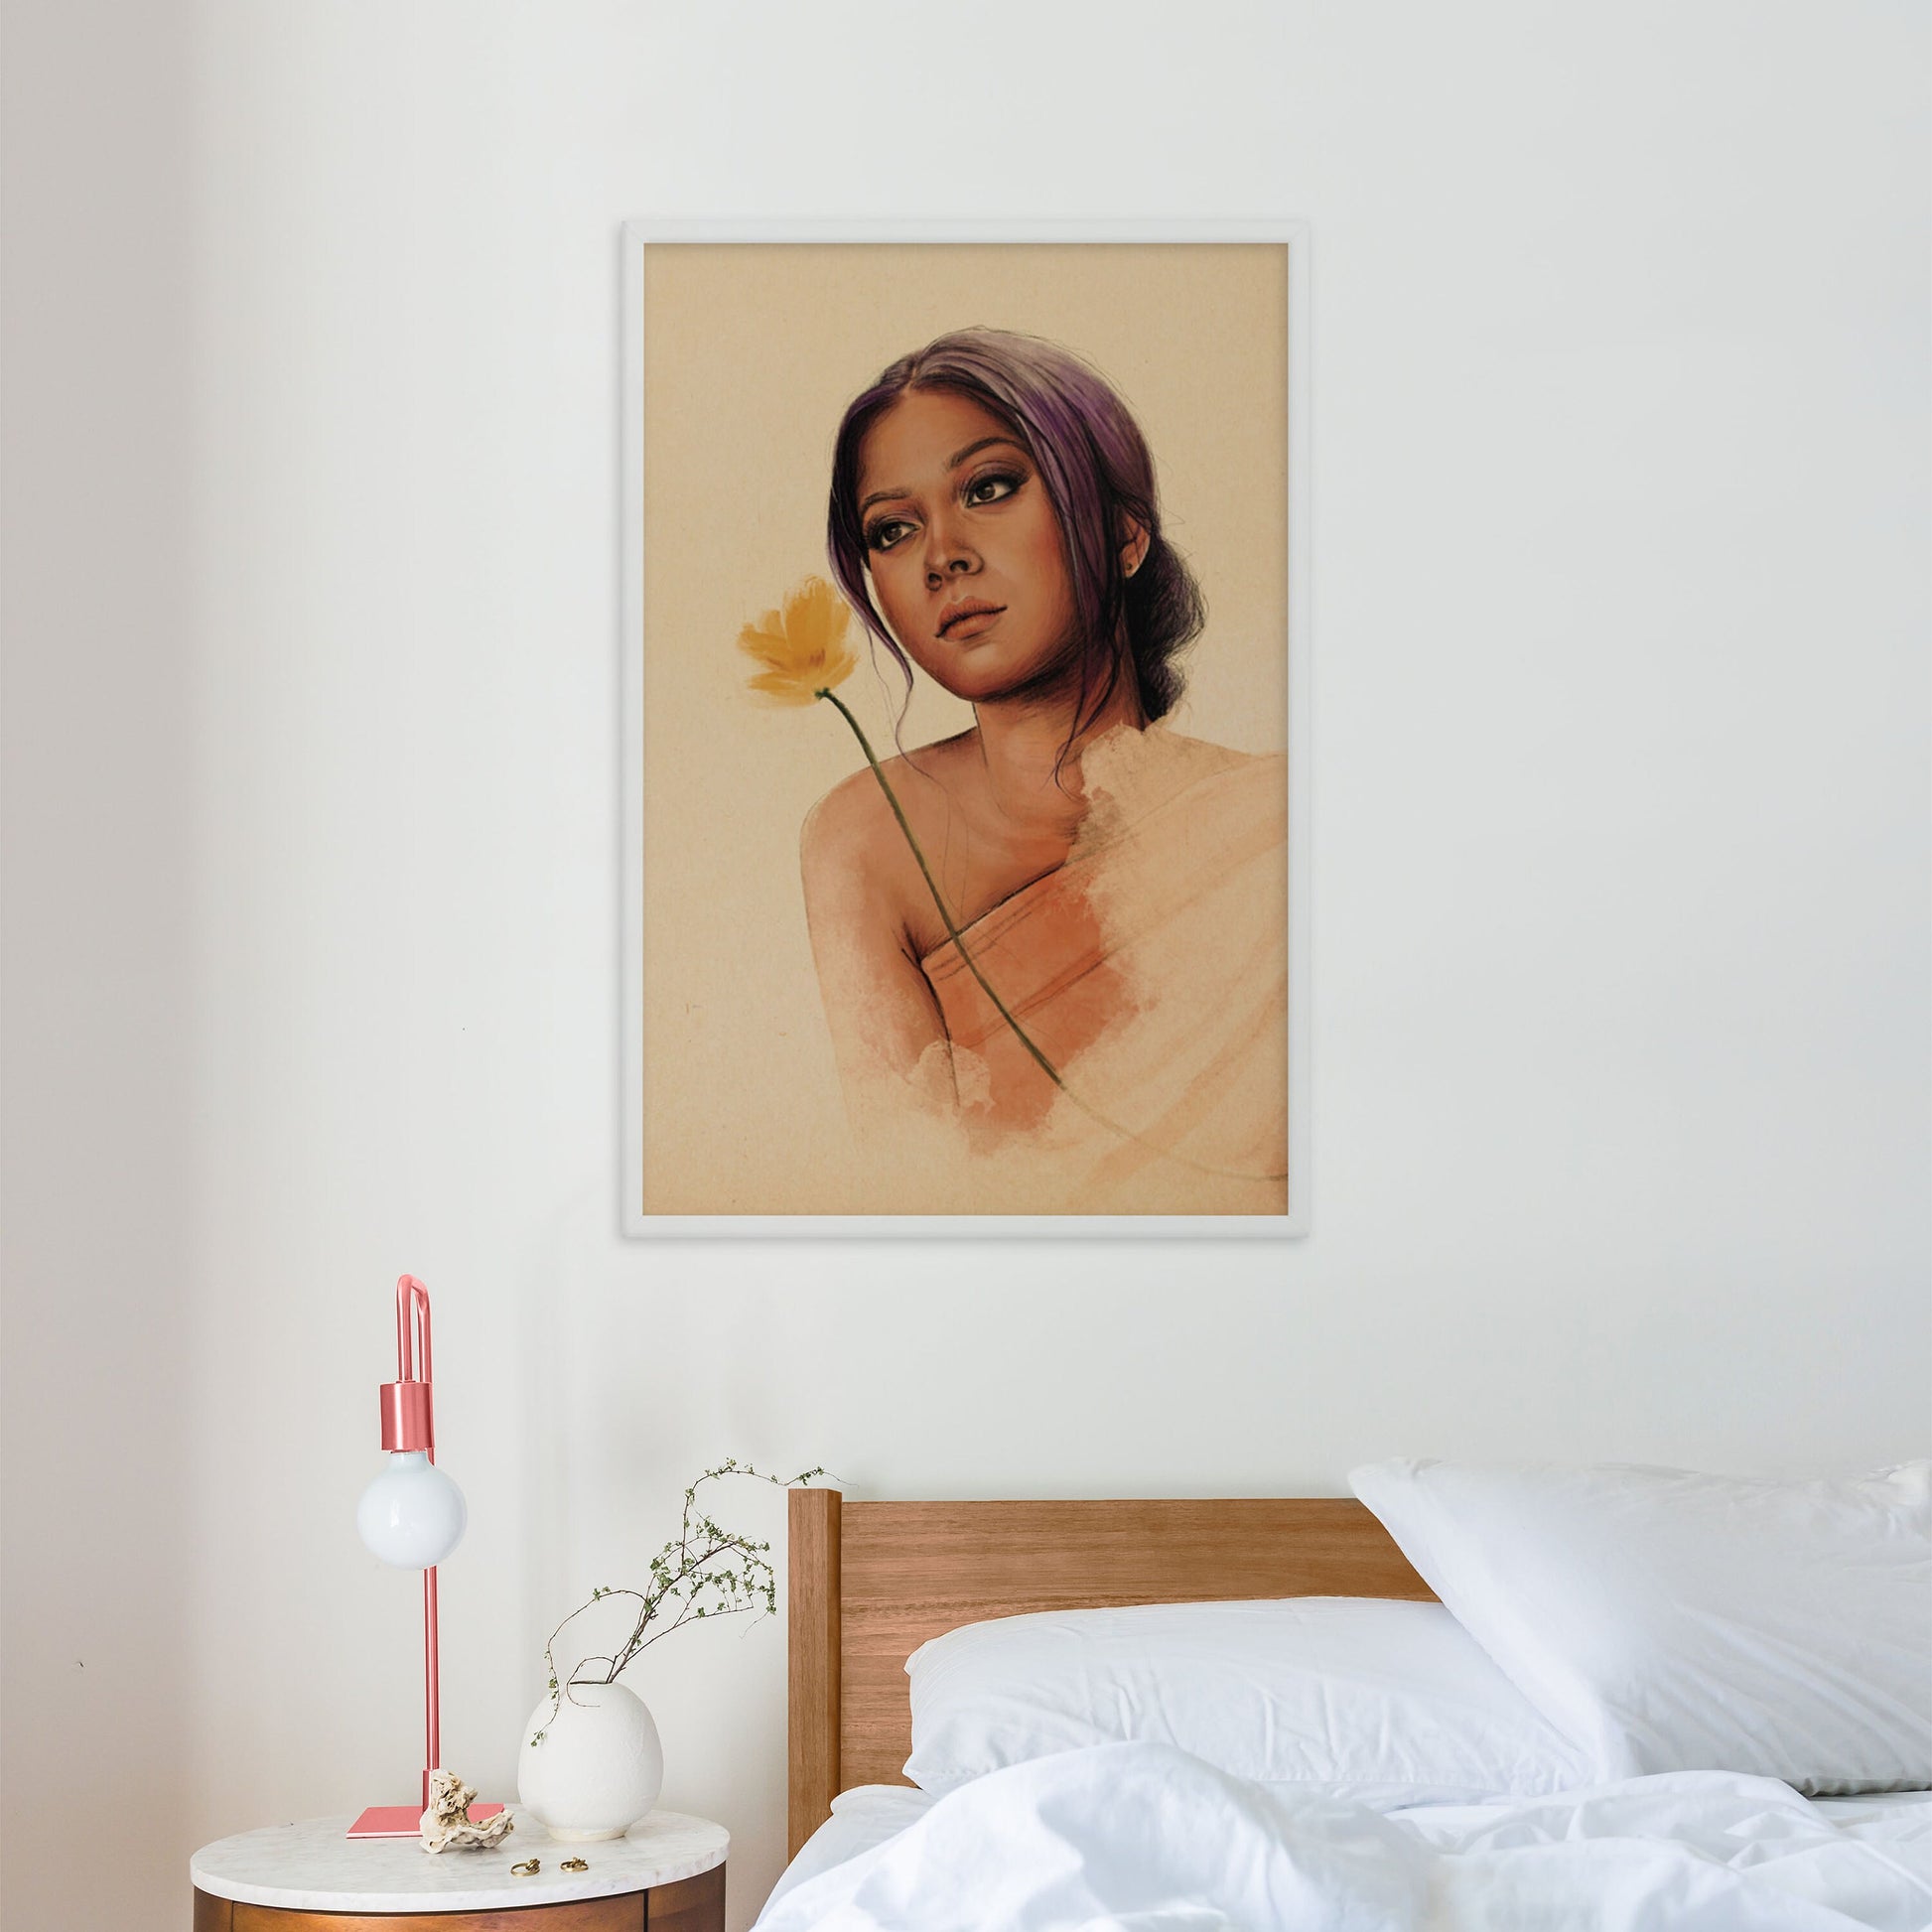 Simple Indian Woman in rust color saree with yellow flower wall art poster in white frame on bedroom wall